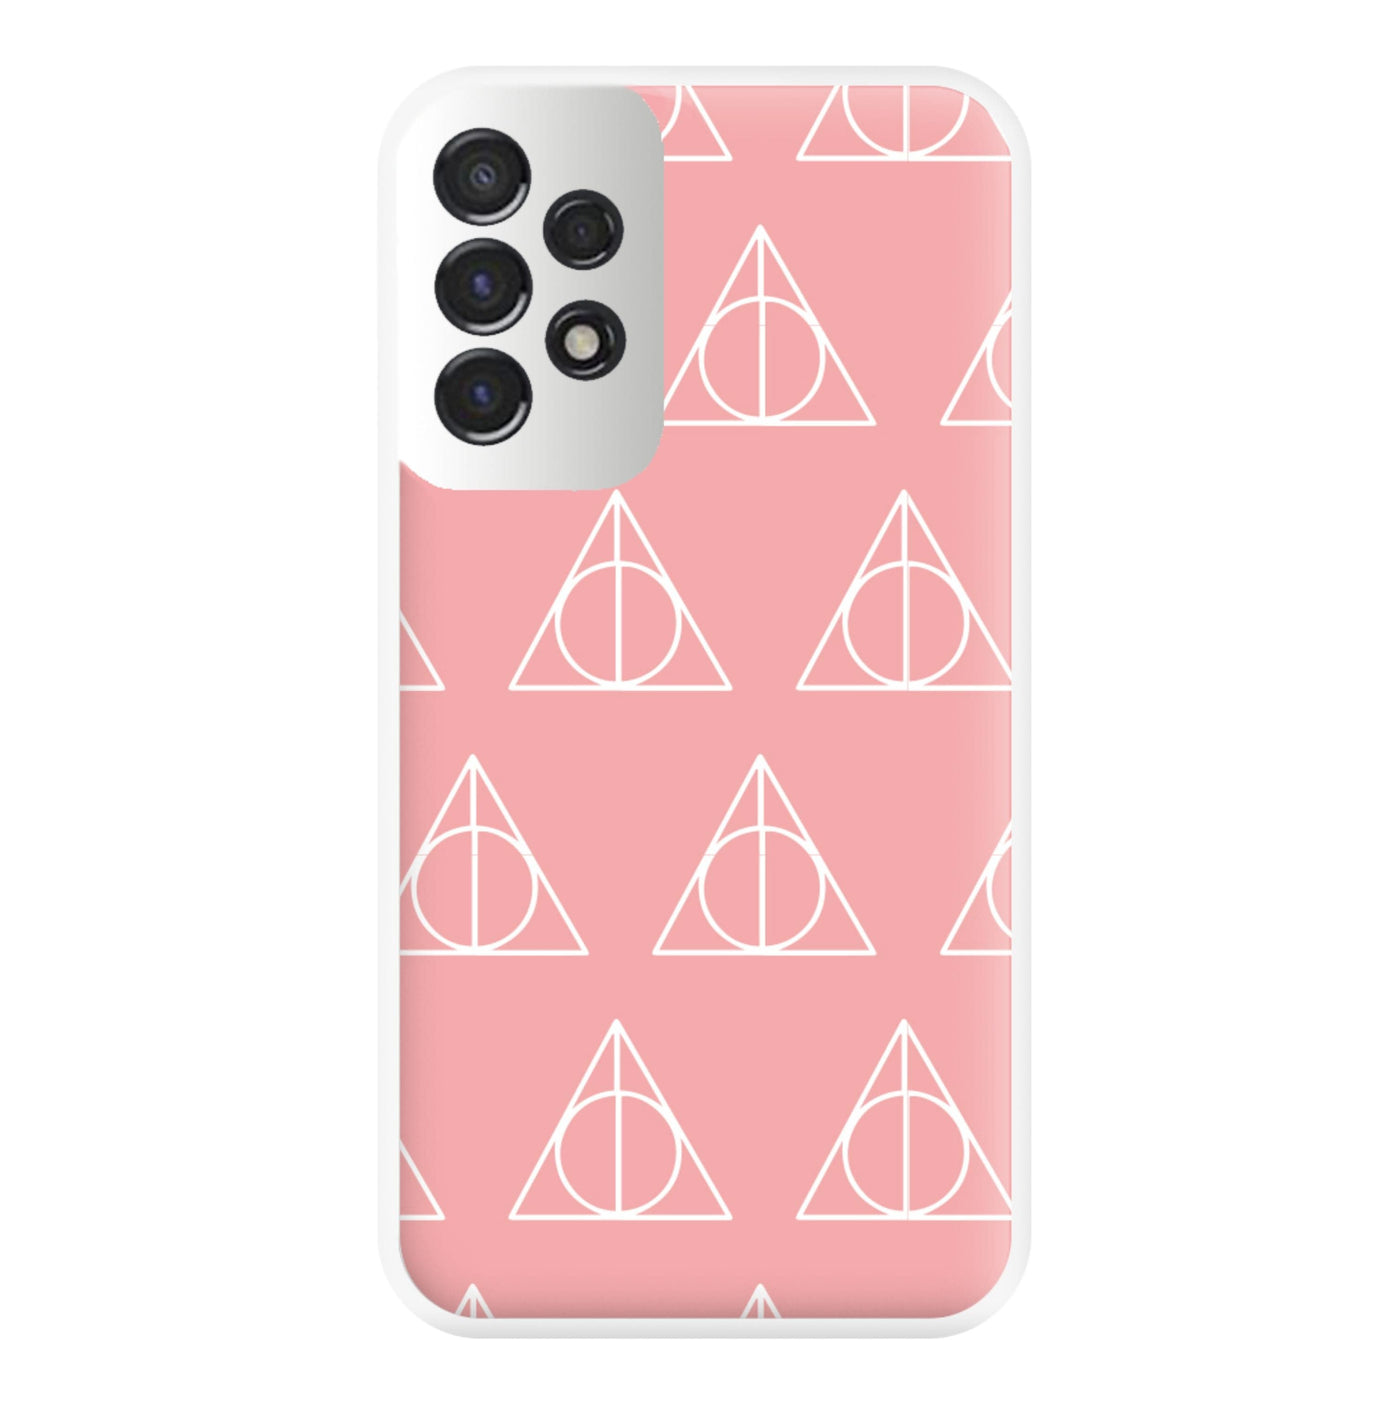 The Deathly Hallows Symbol Pattern - Harry Potter Phone Case